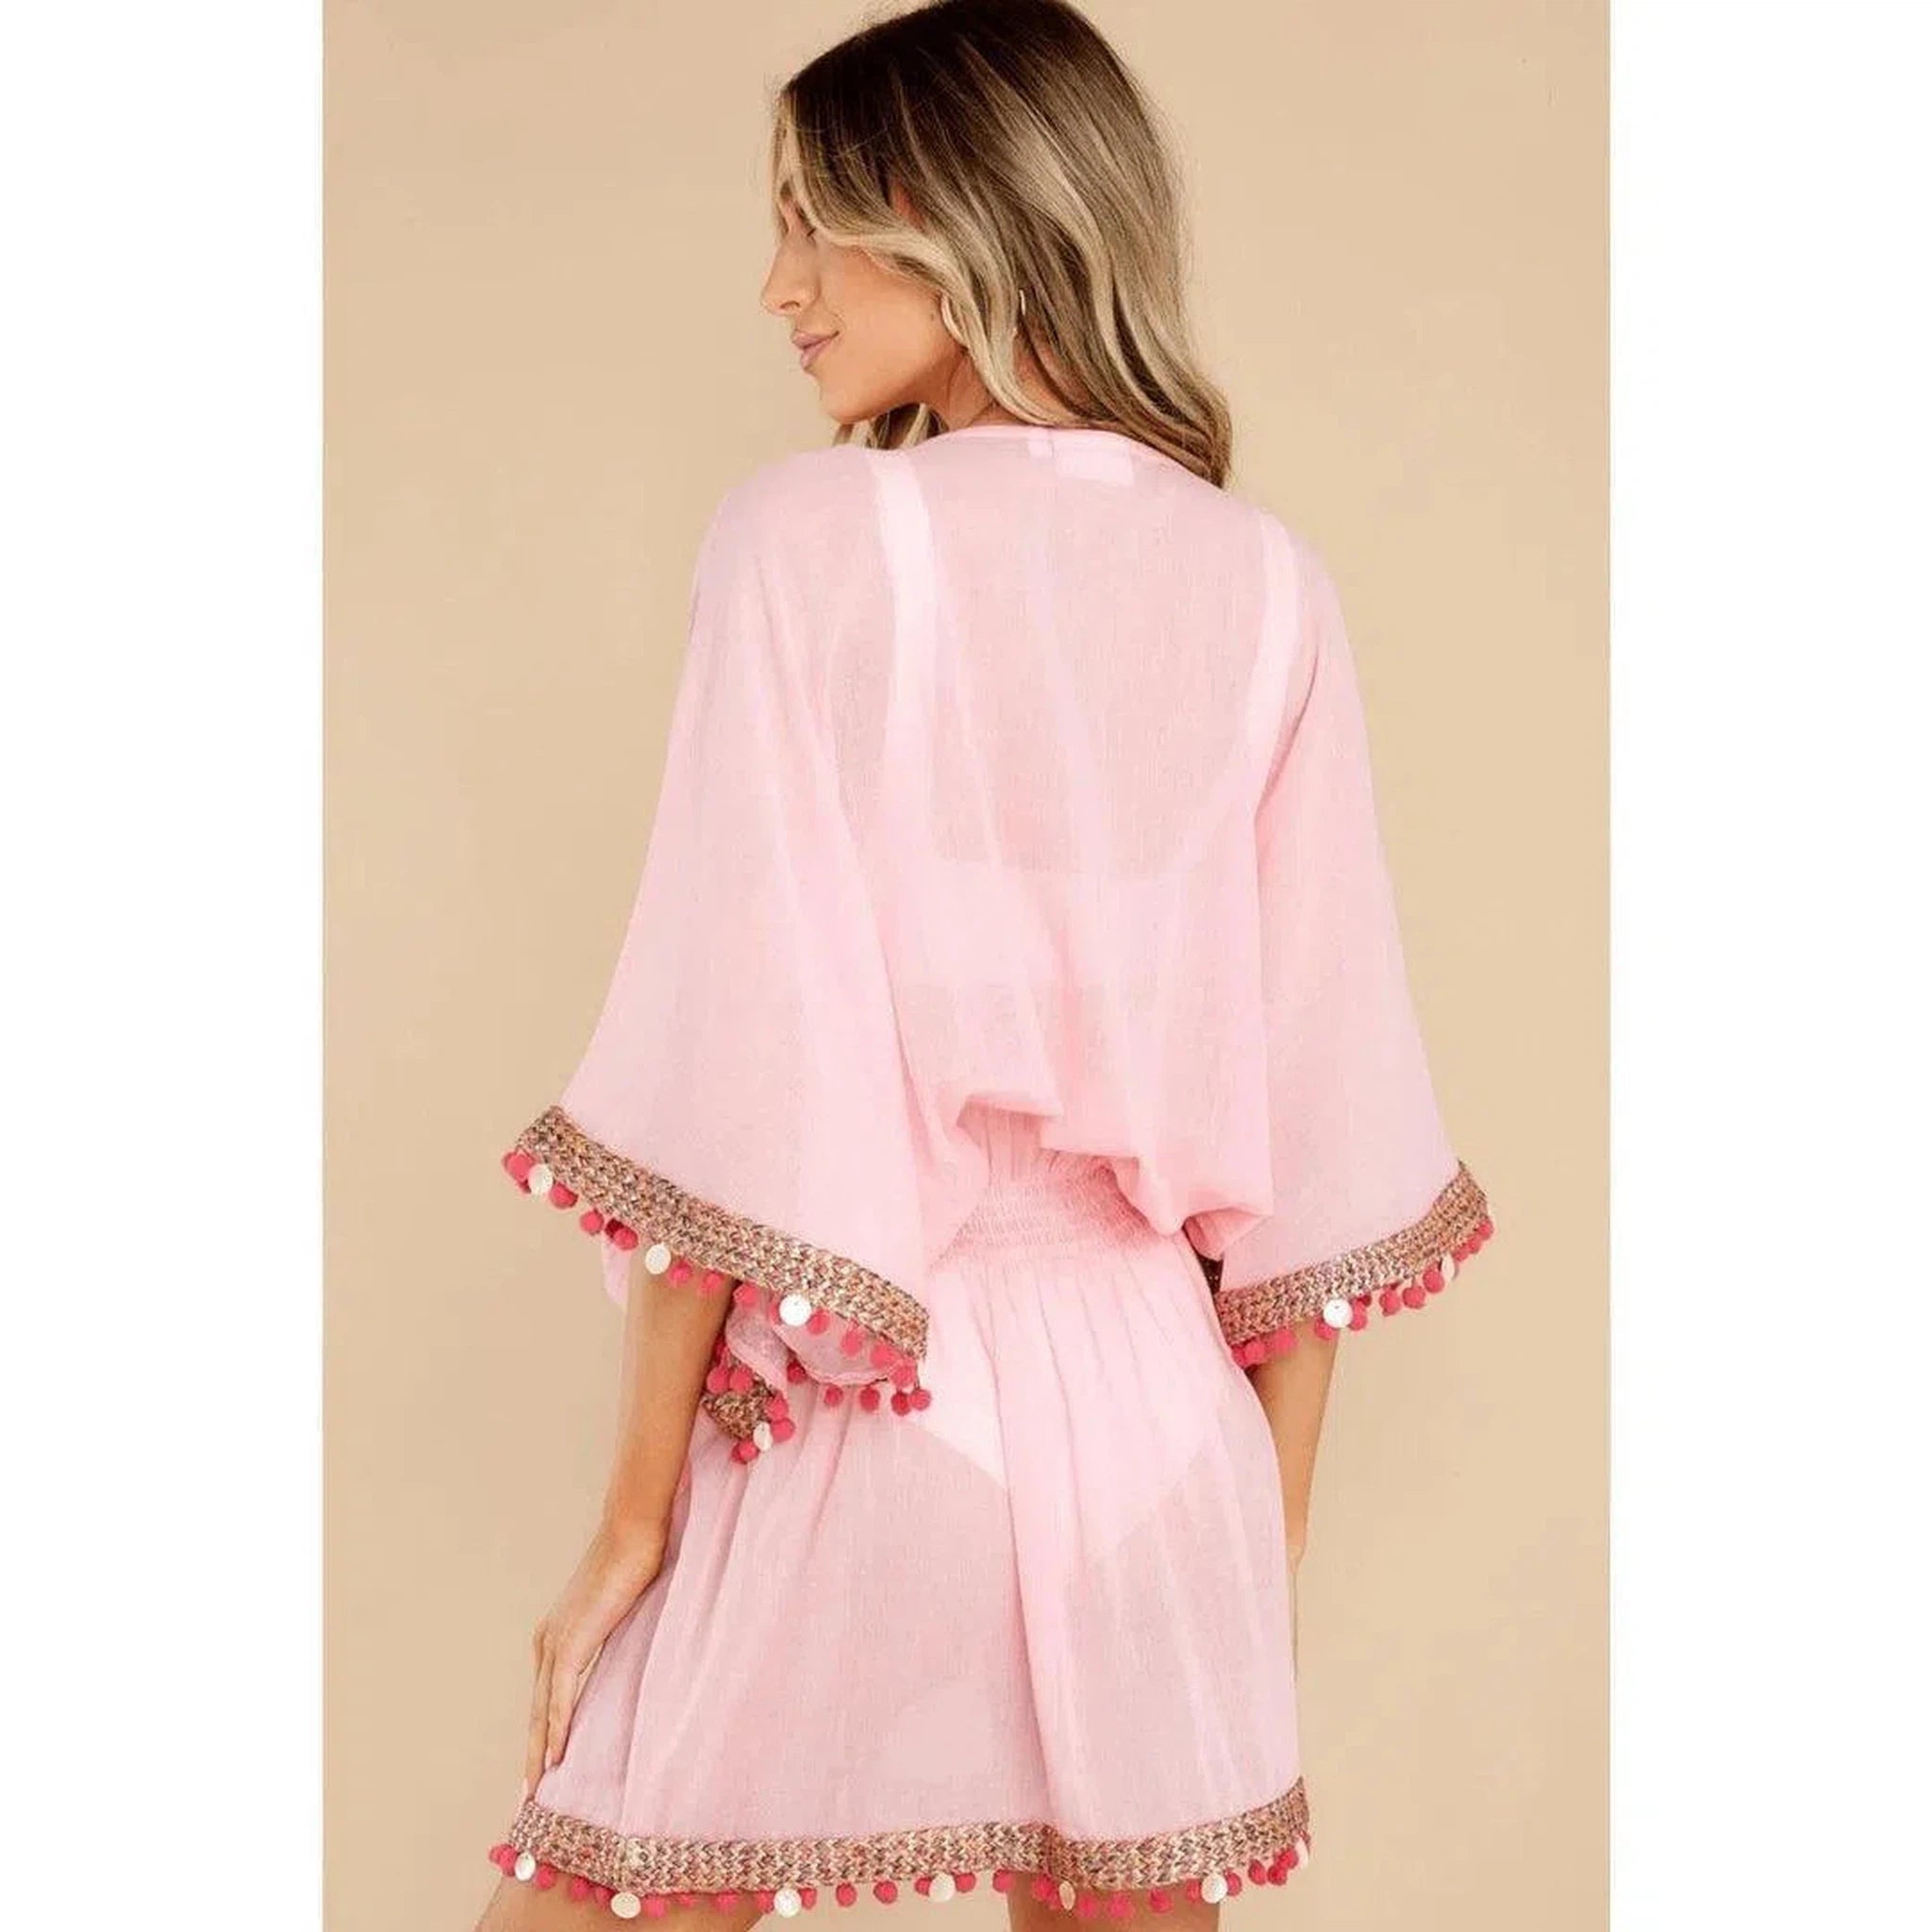 The Dede Beach Cover Up